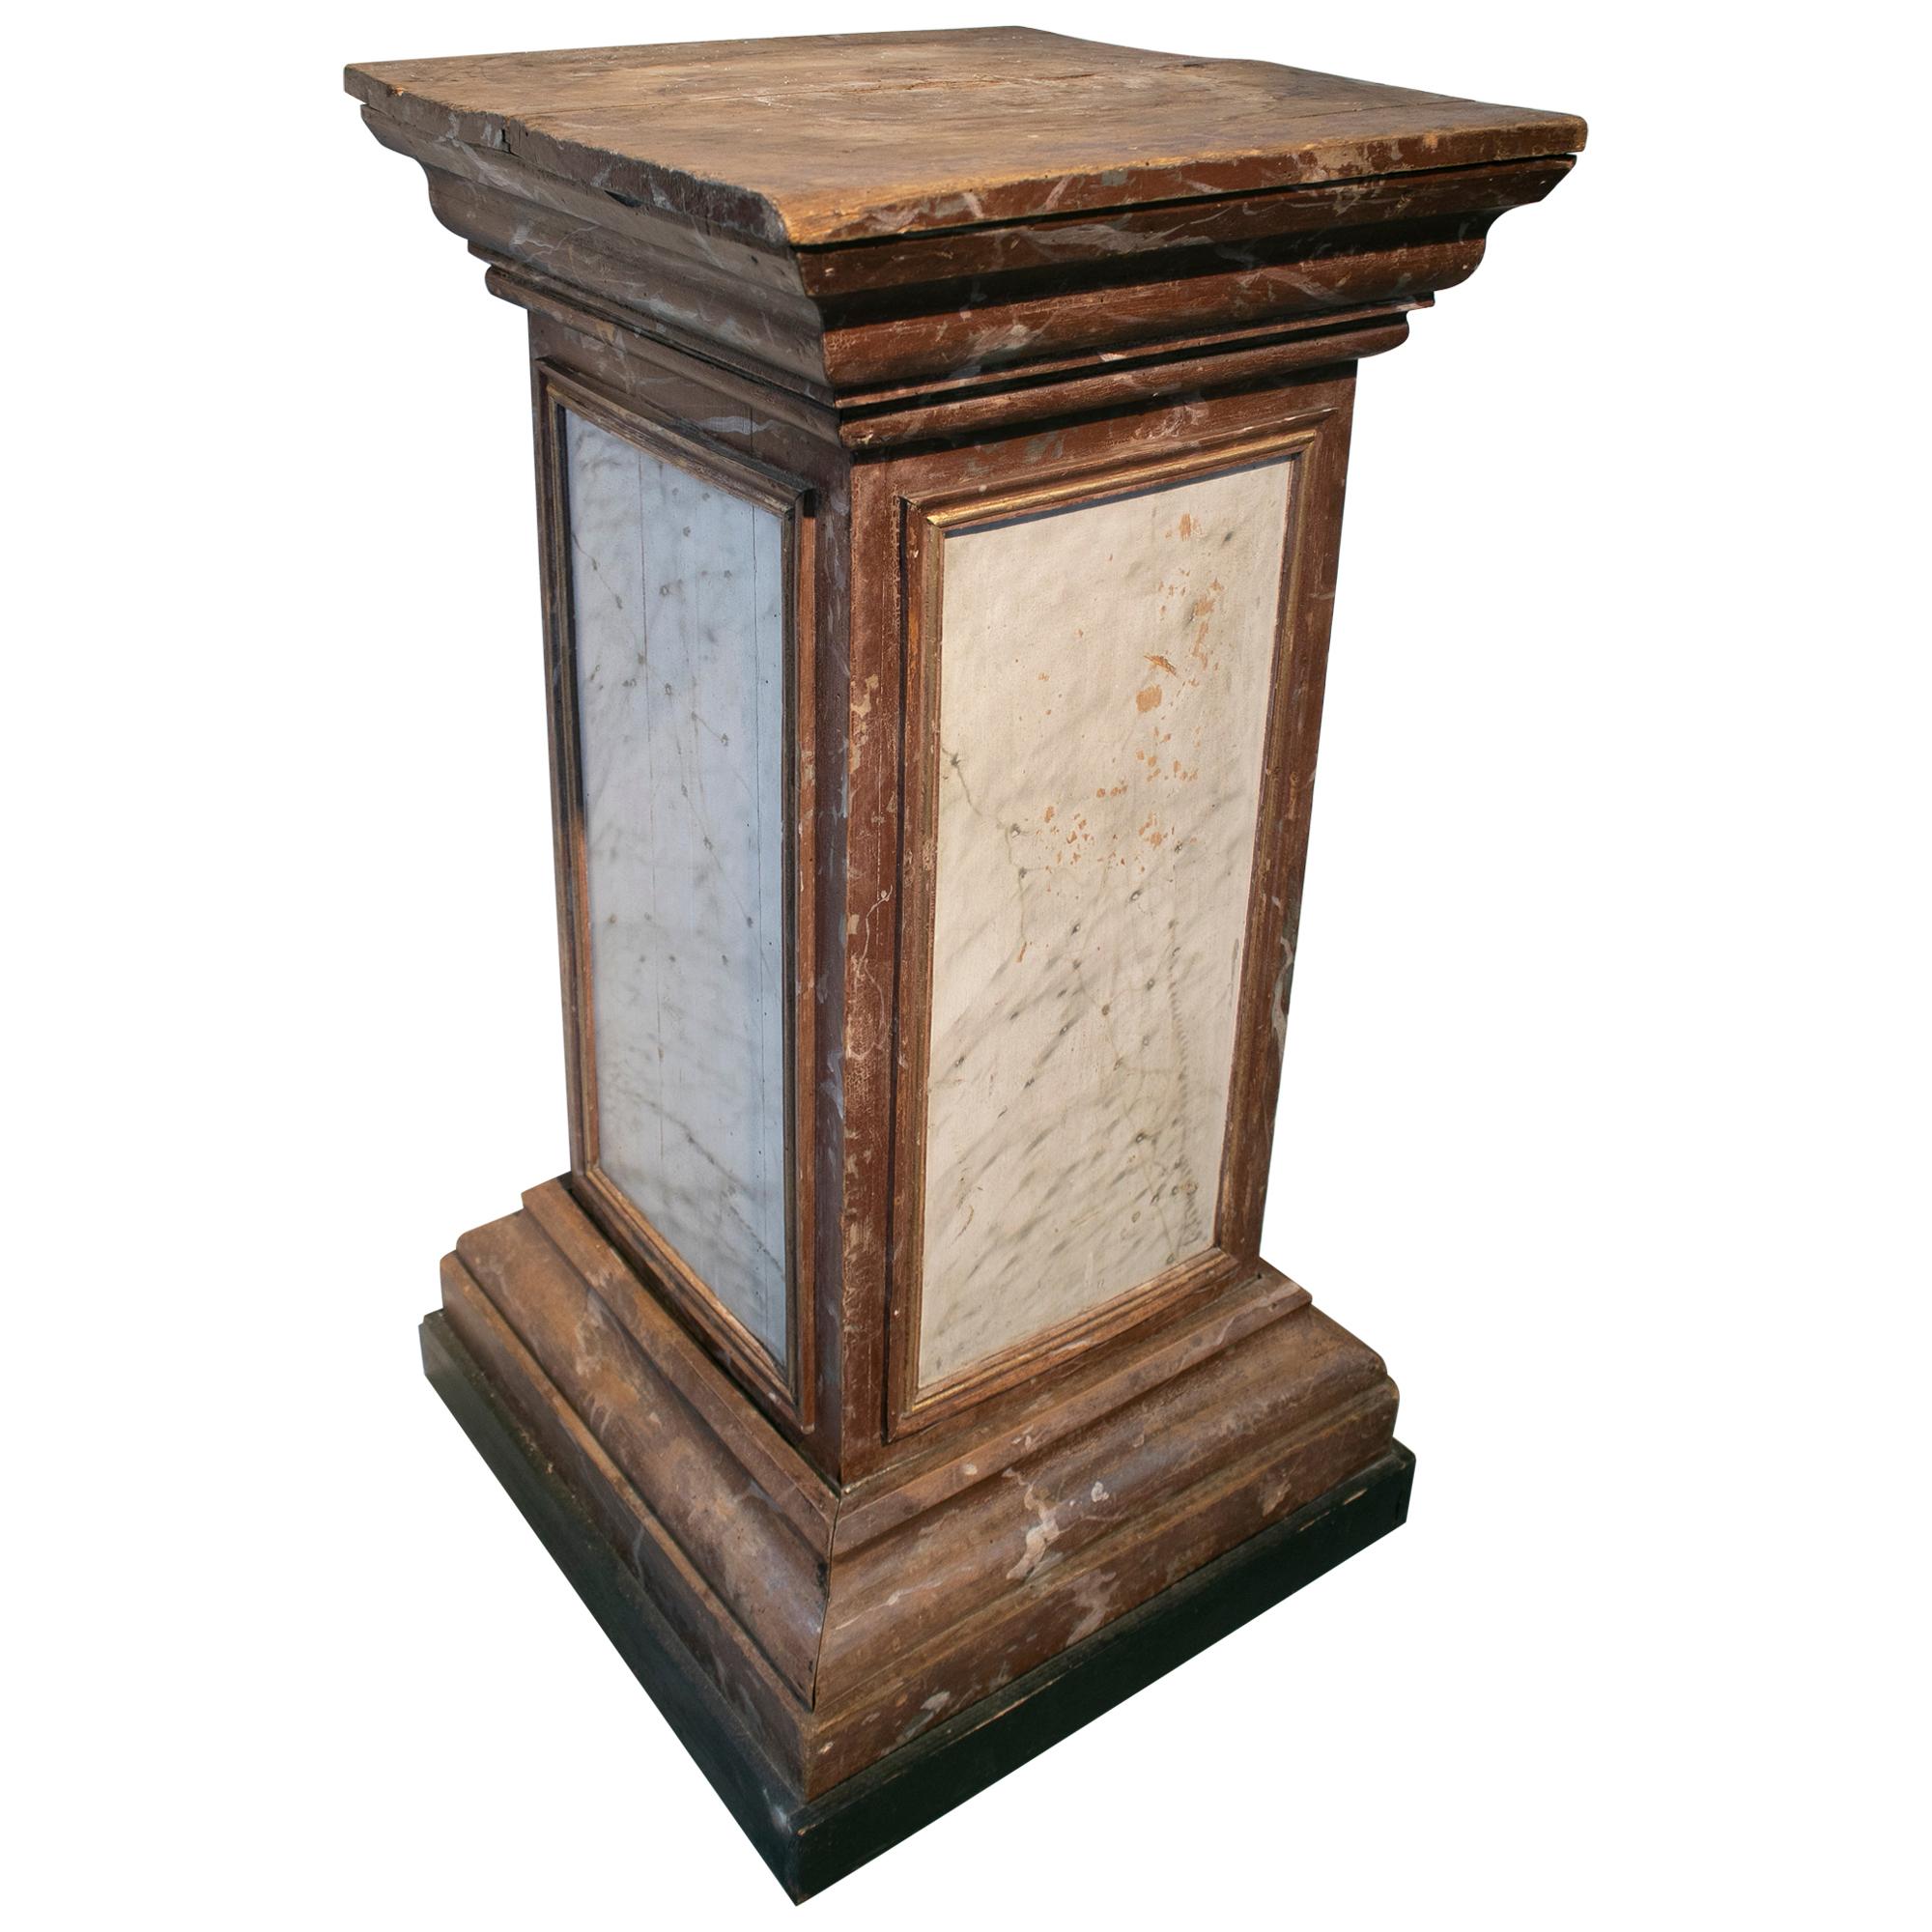 19th Century Spanish Wooden Pedestal Base Painted in Faux Marble